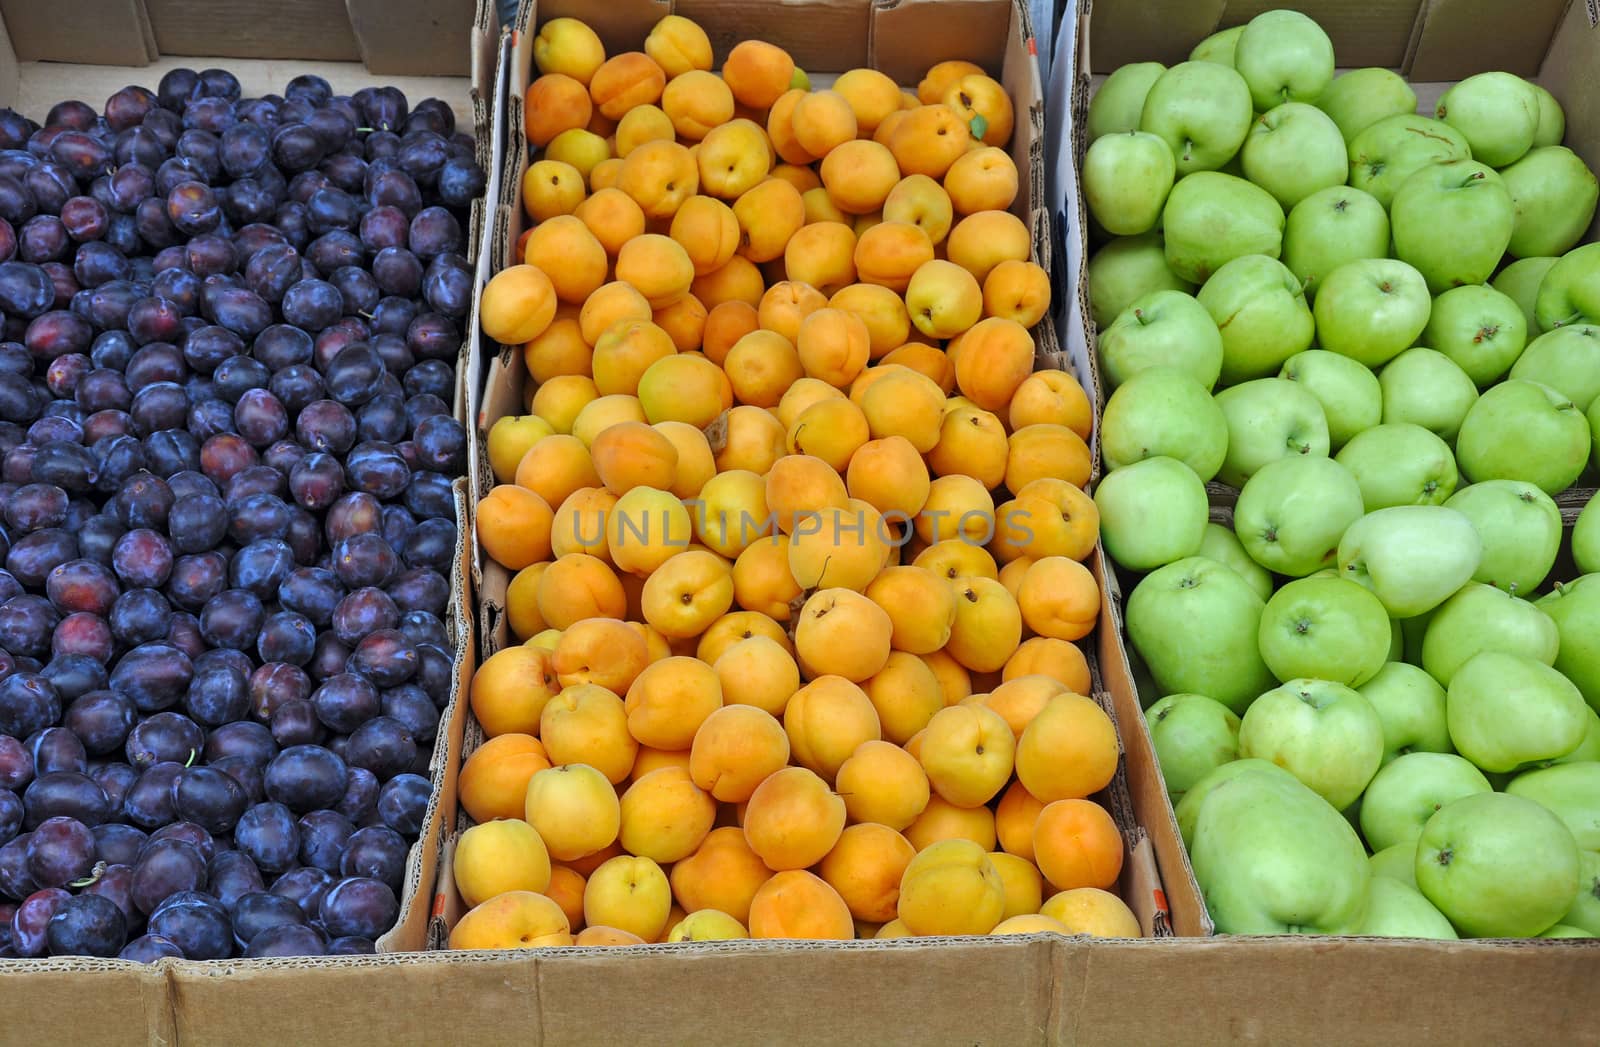 Boxes of colorful plums,nectarines and apples